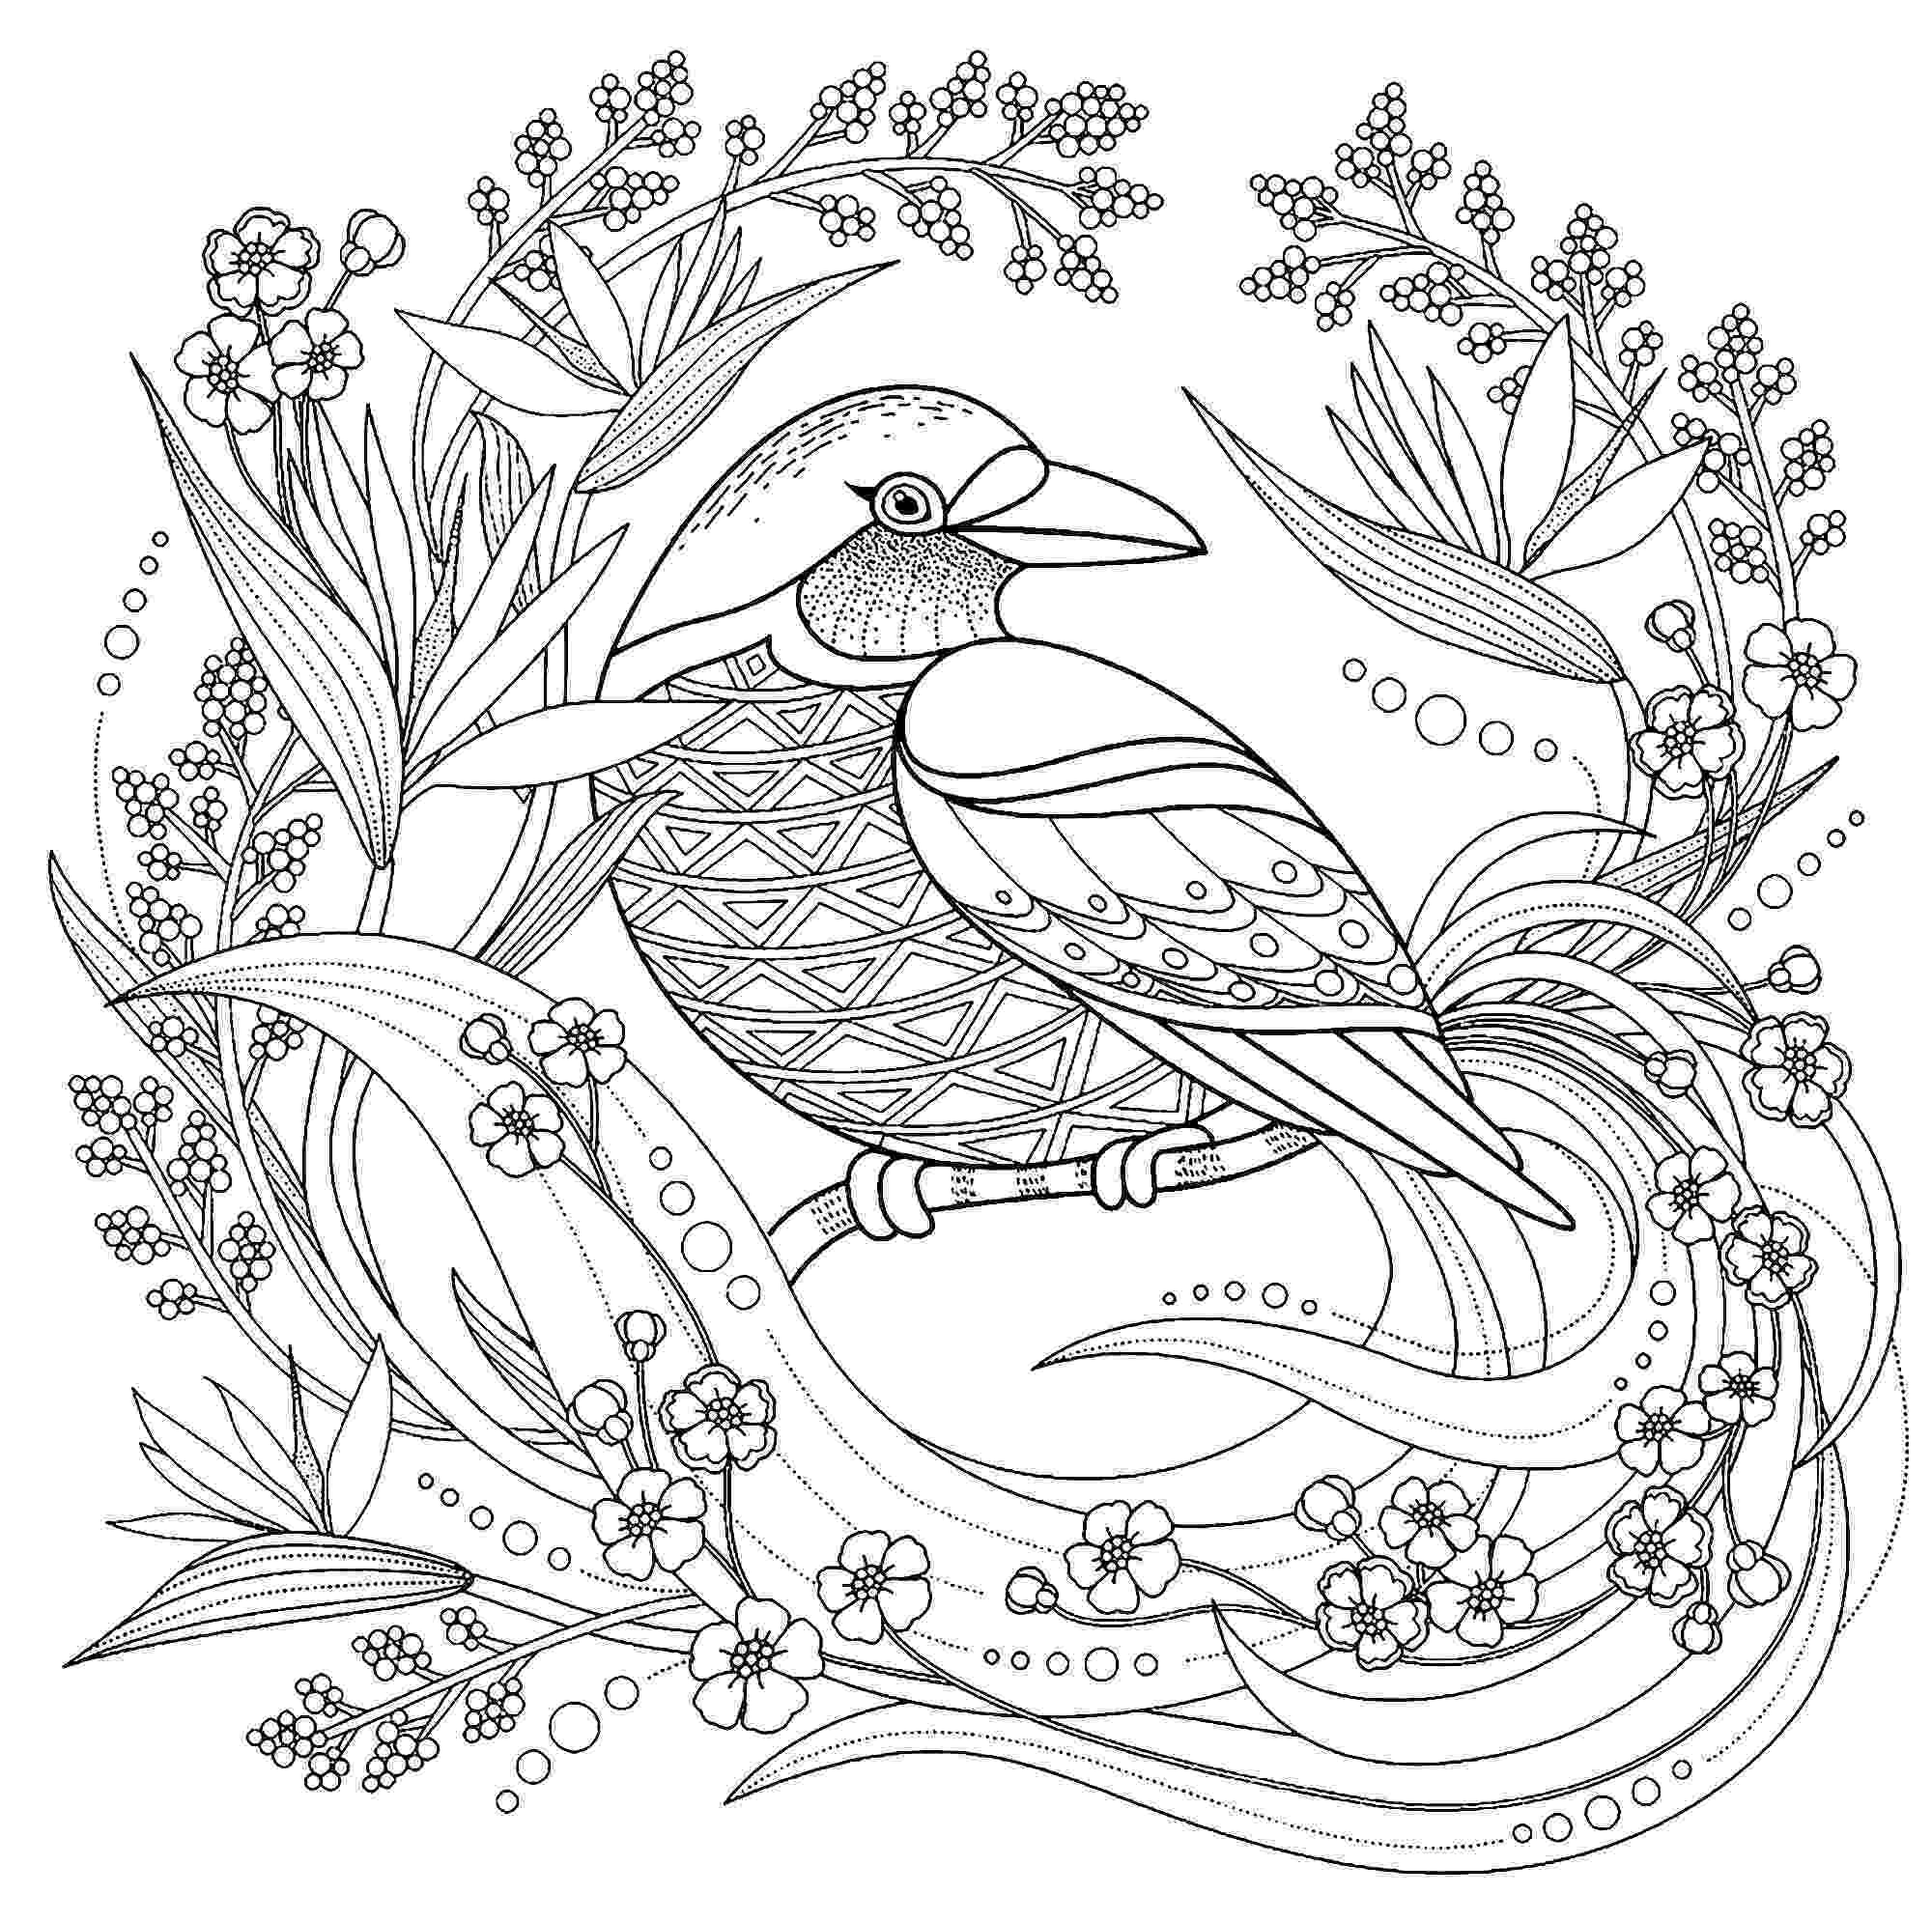 free bird coloring pages birds free to color for children birds kids coloring pages pages coloring bird free 